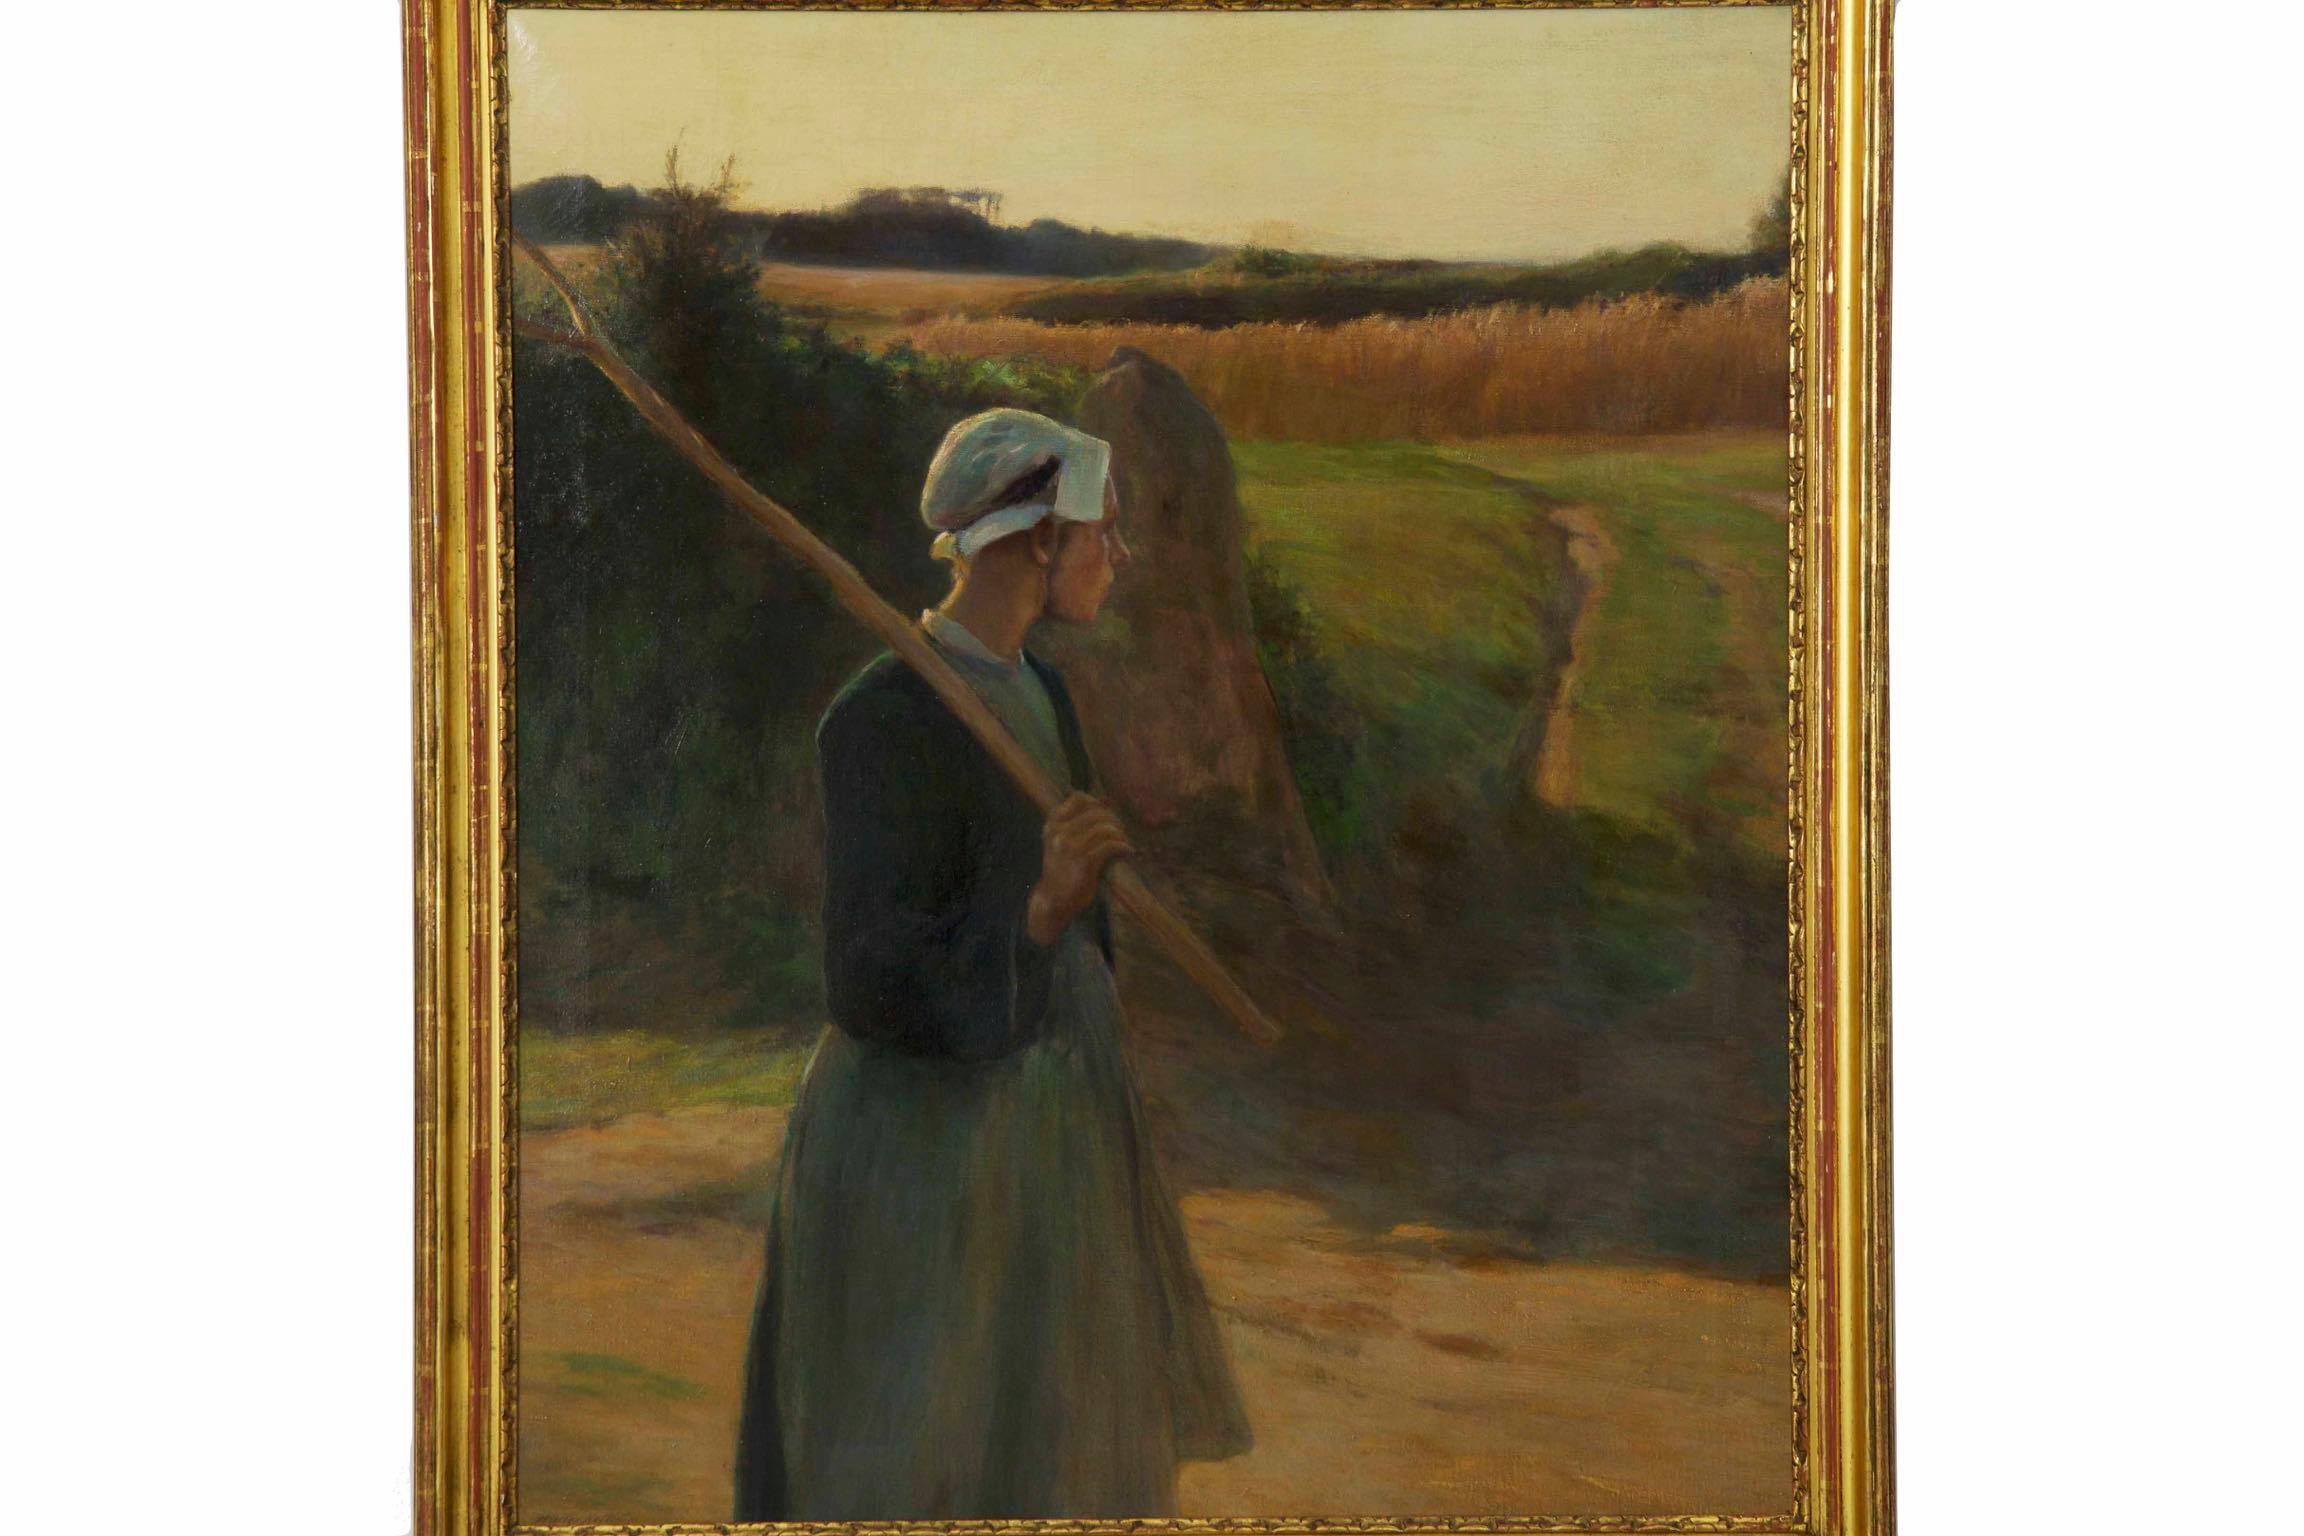 This is a fine painting by Walter Eben Nettleton capturing a peasant girl looking over the fields of wheat at the end of the day. There is a tonalism quality to the work that allows each layer of the background to slowly meld into the next; there is